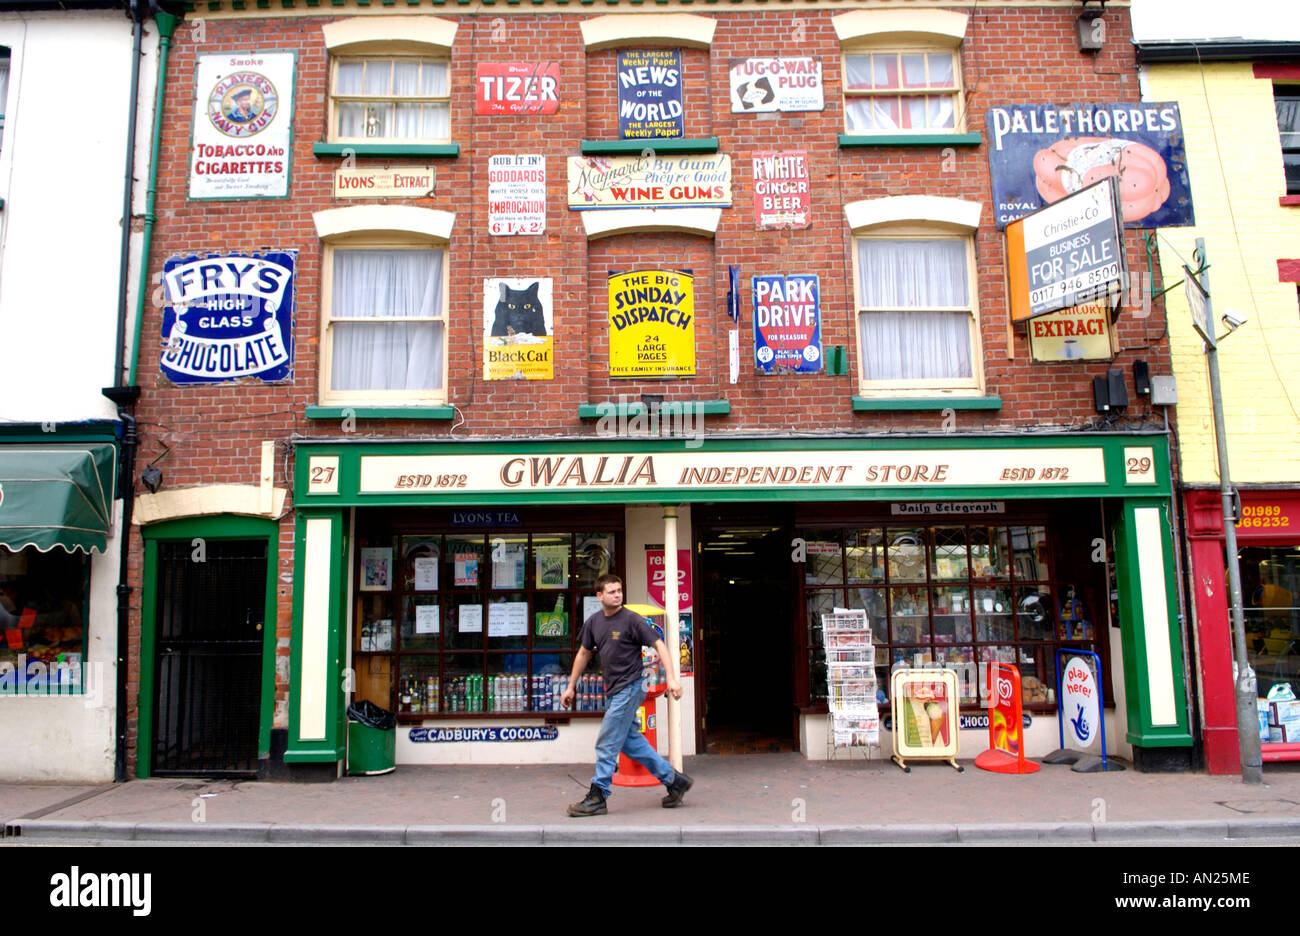 Gwalia independent store displaying old enamel advertising signs in rural market town of Ross on Wye Herefordshire England UK Stock Photo